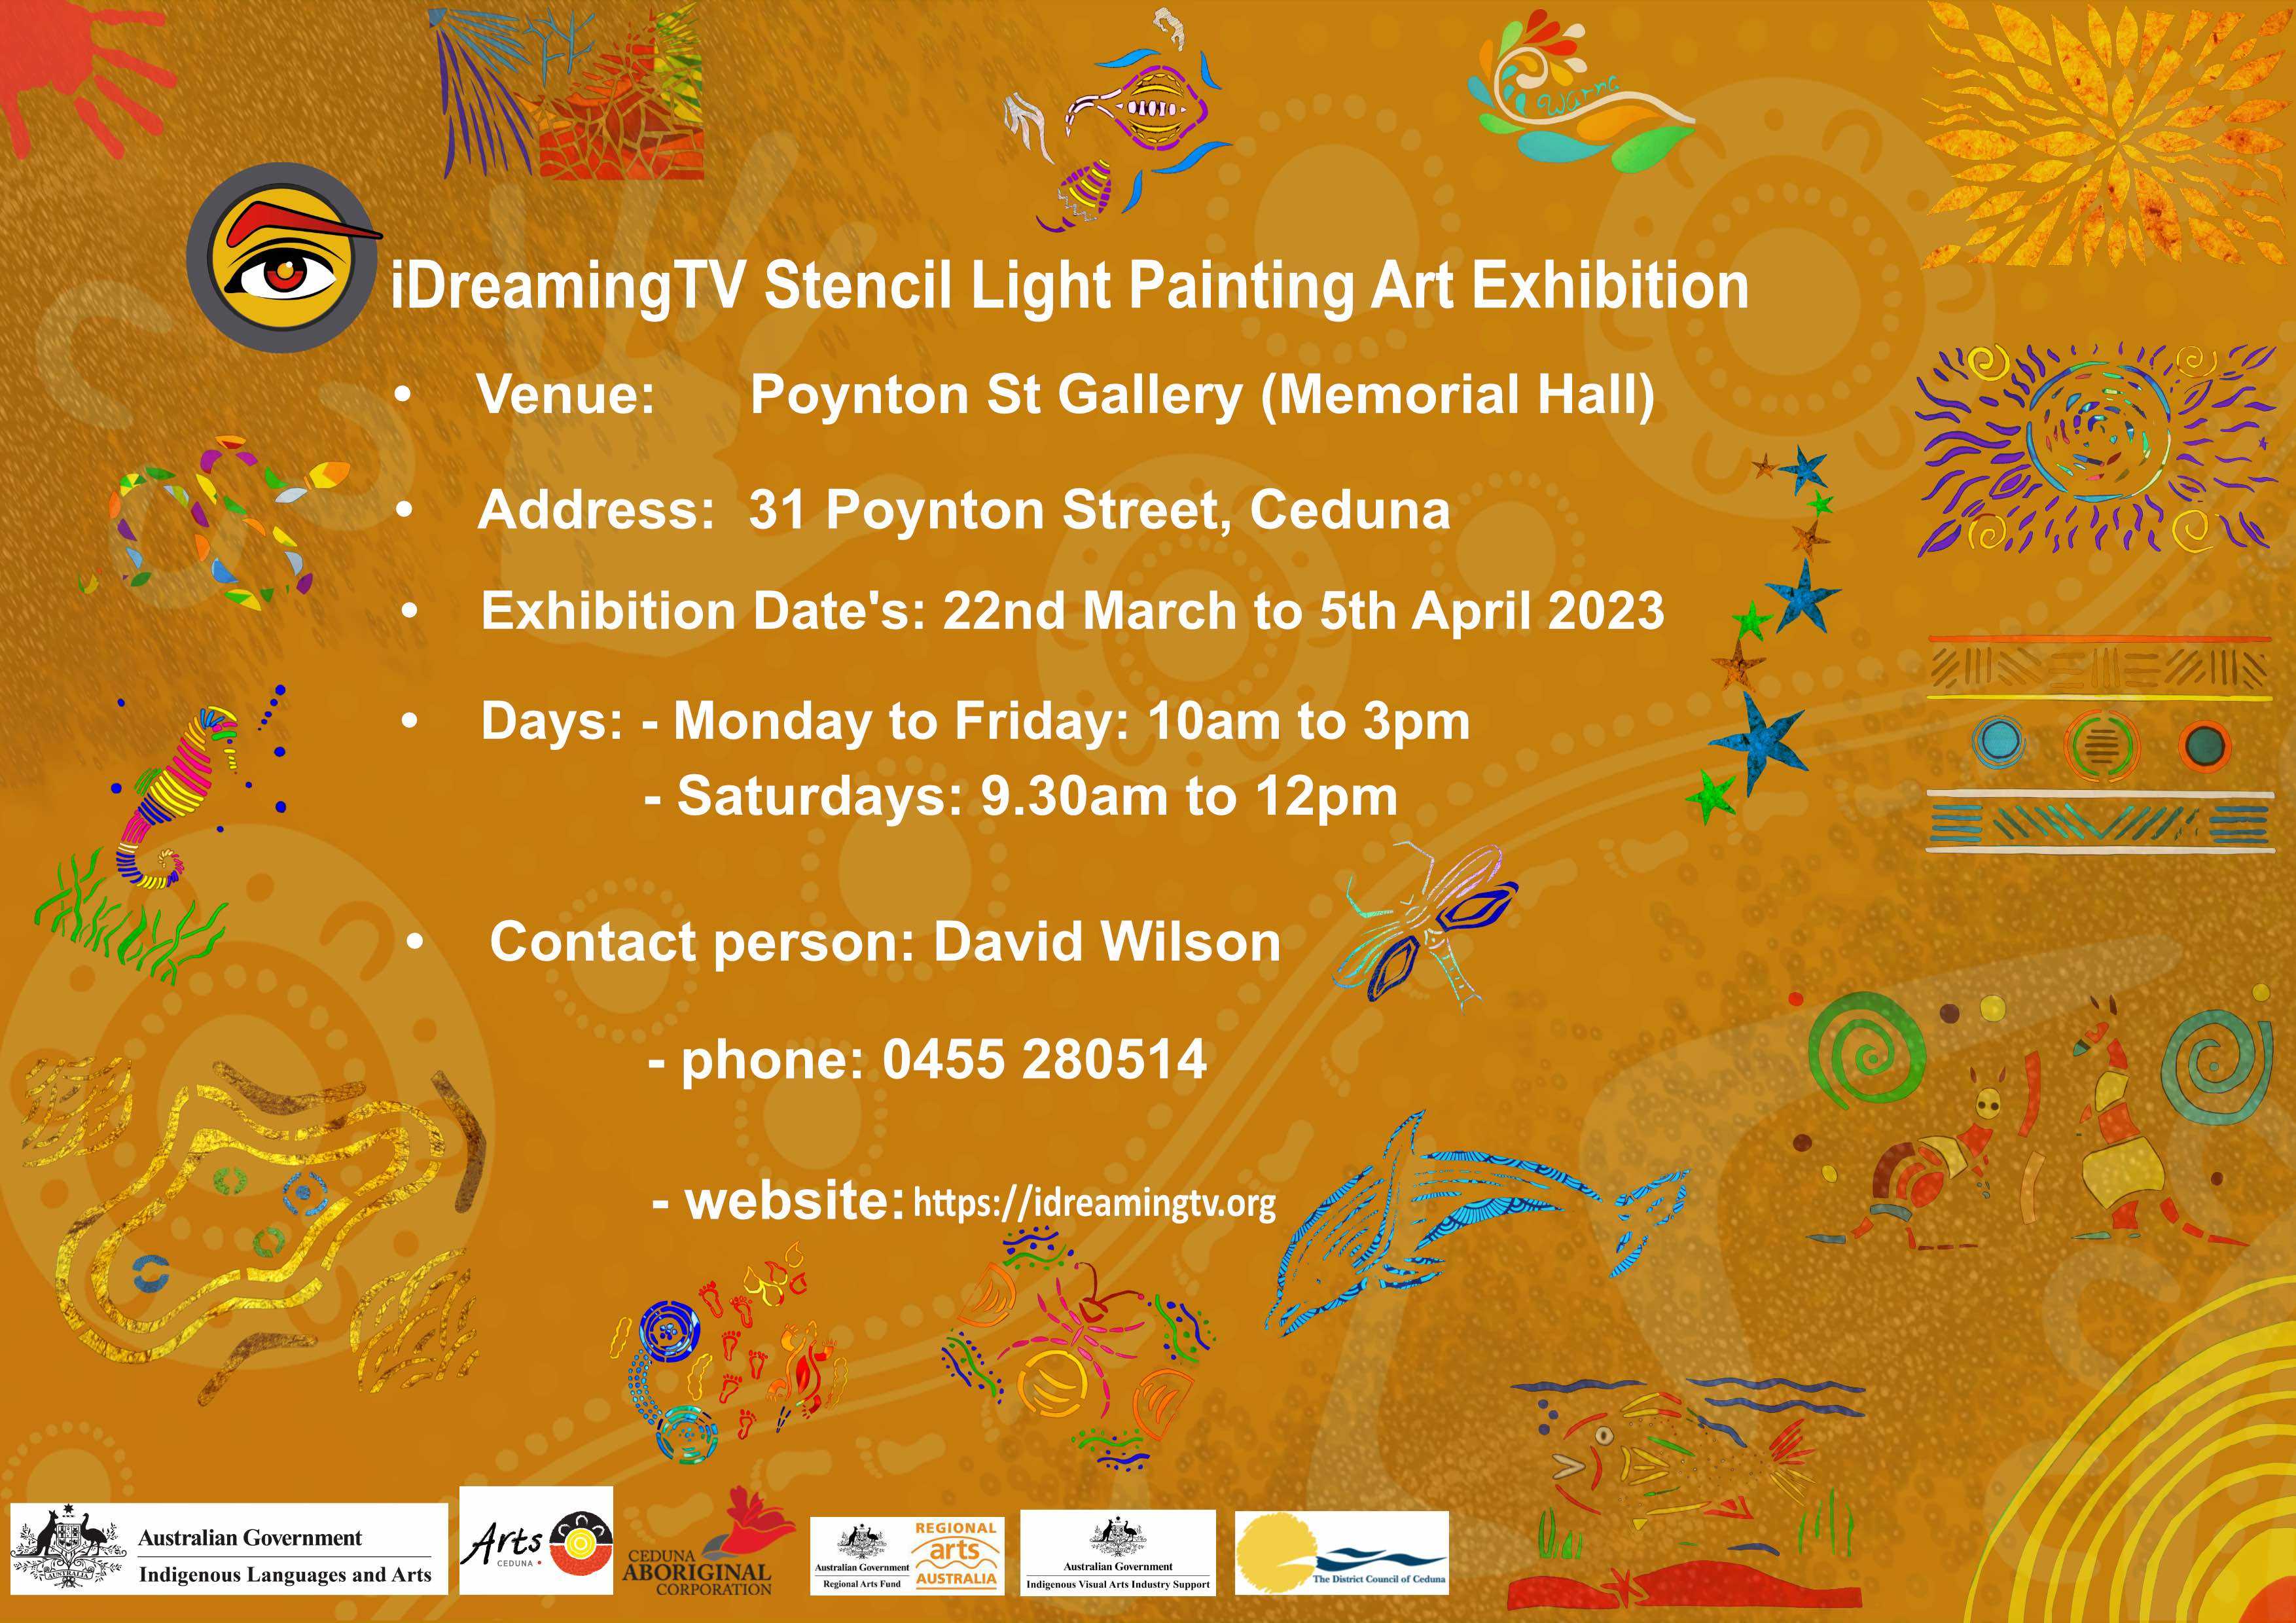 iDreamingTV's stencil light art exhibition is at Poynton St Gallery in Ceduna from 22/3/23 to 5/4/23. Check out the beautiful artwork created by local Ceduna, Kooniba and statewide Indigenous artist.